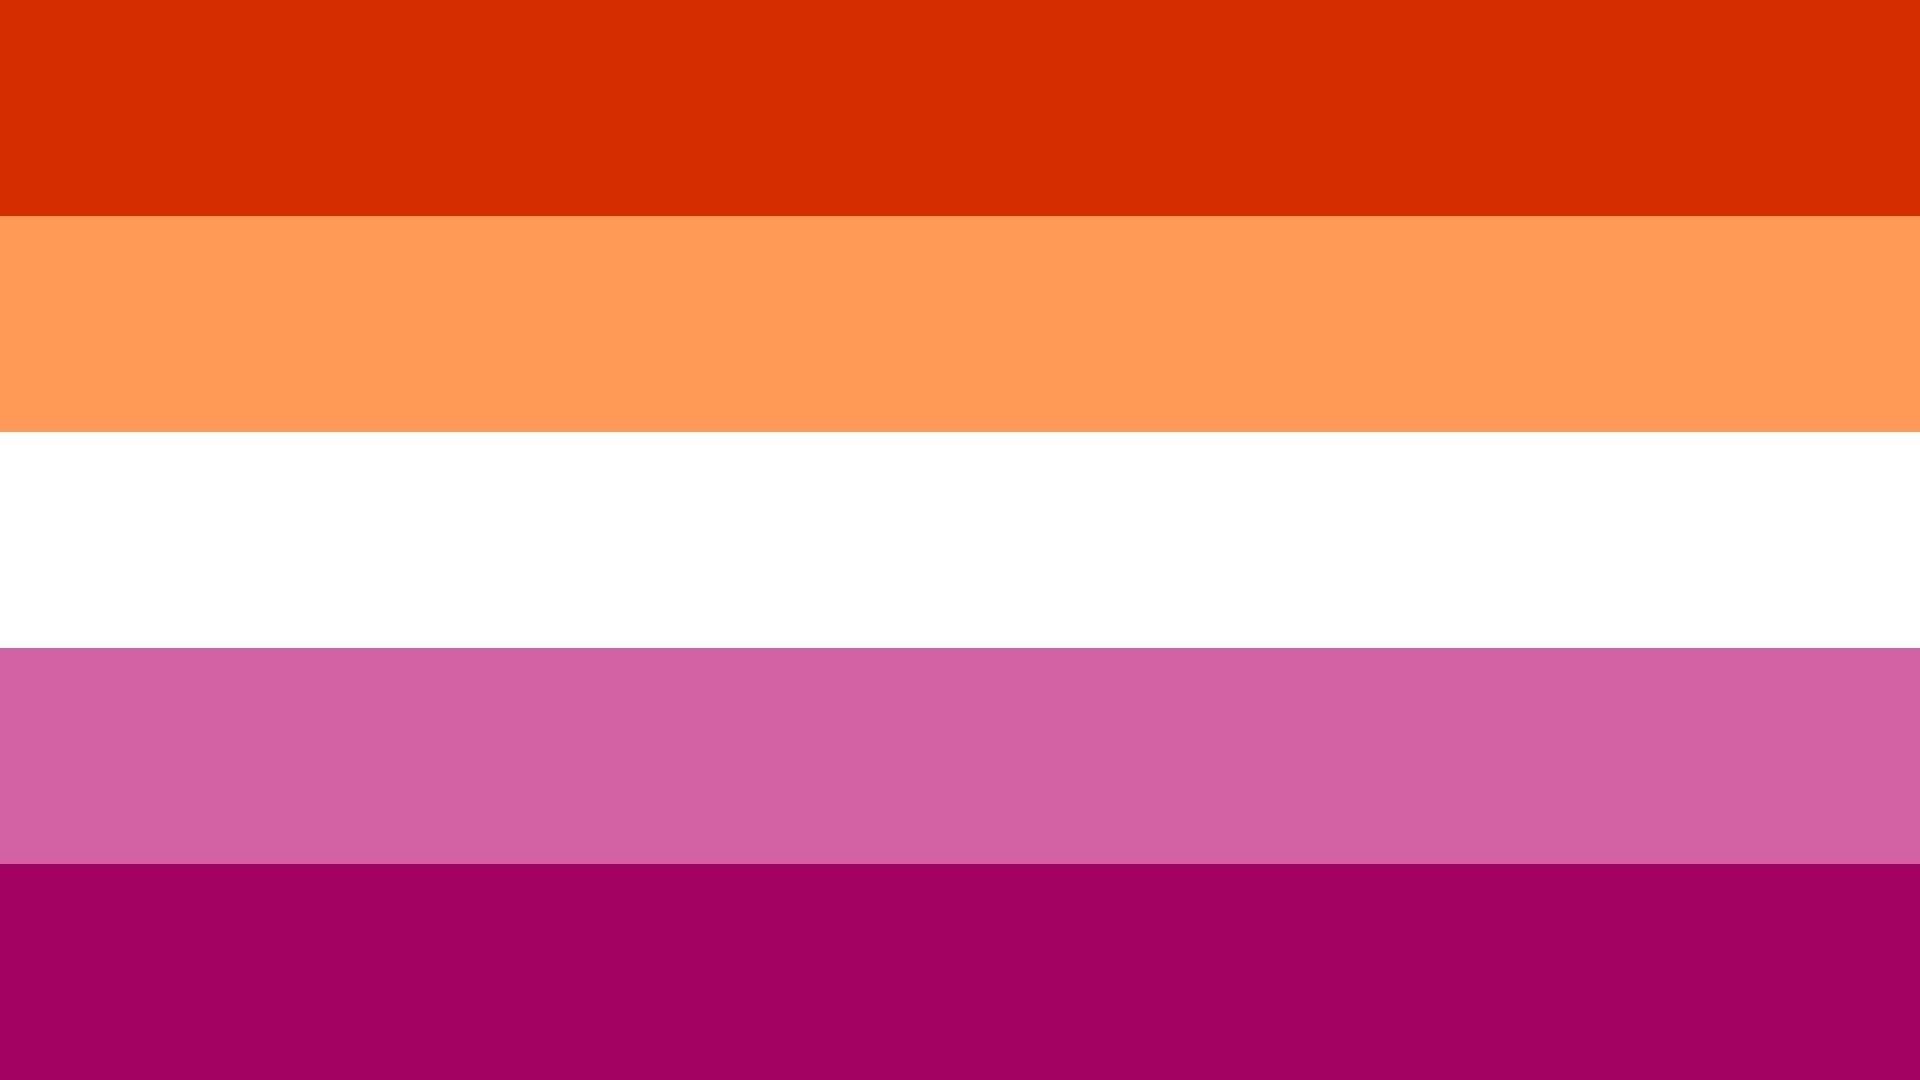 One variation of a pride flag representing lesbian women.